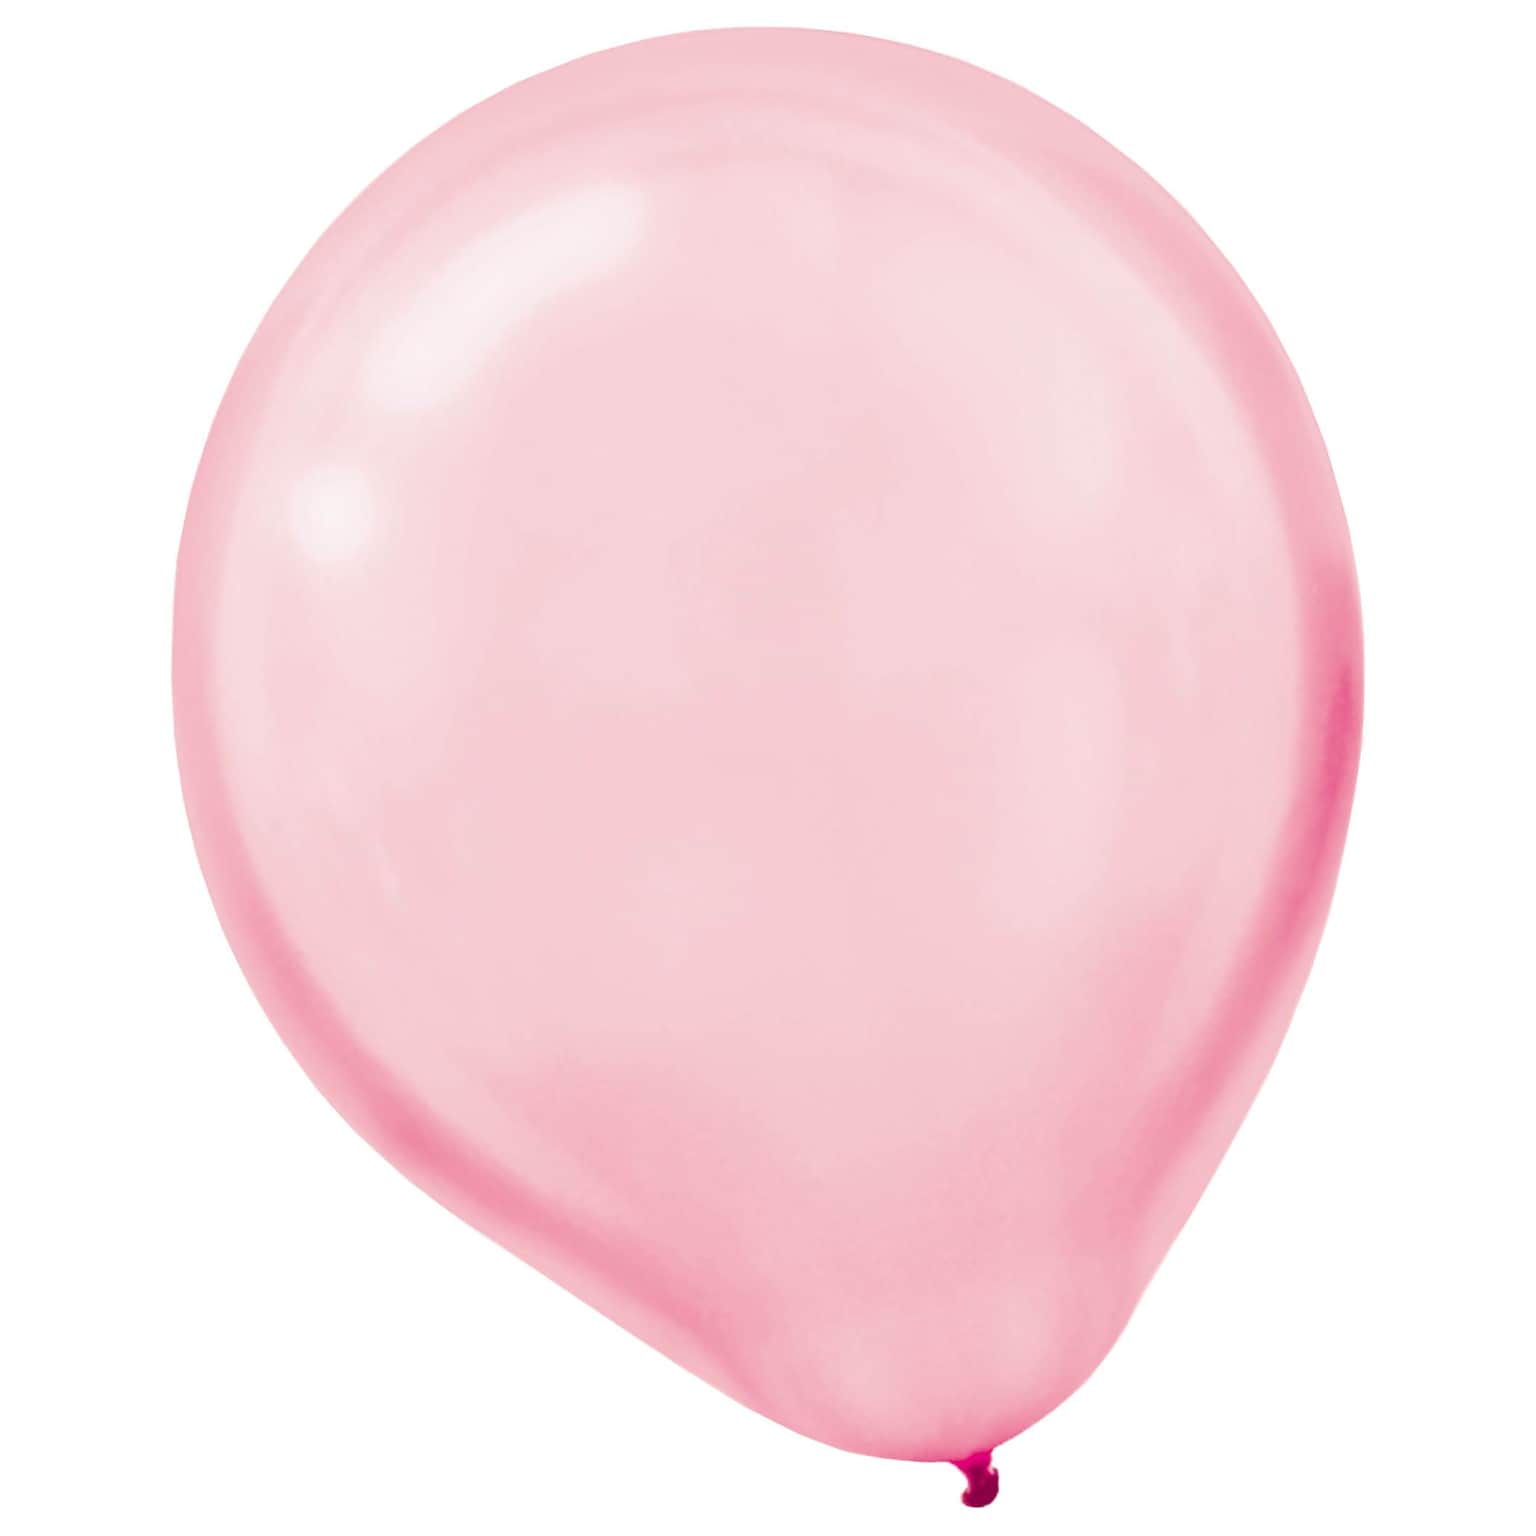 Amscan Pearlized Latex Balloons Packaged, 12, 16/Pack, New Pink, 15 Per Pack (113253.109)